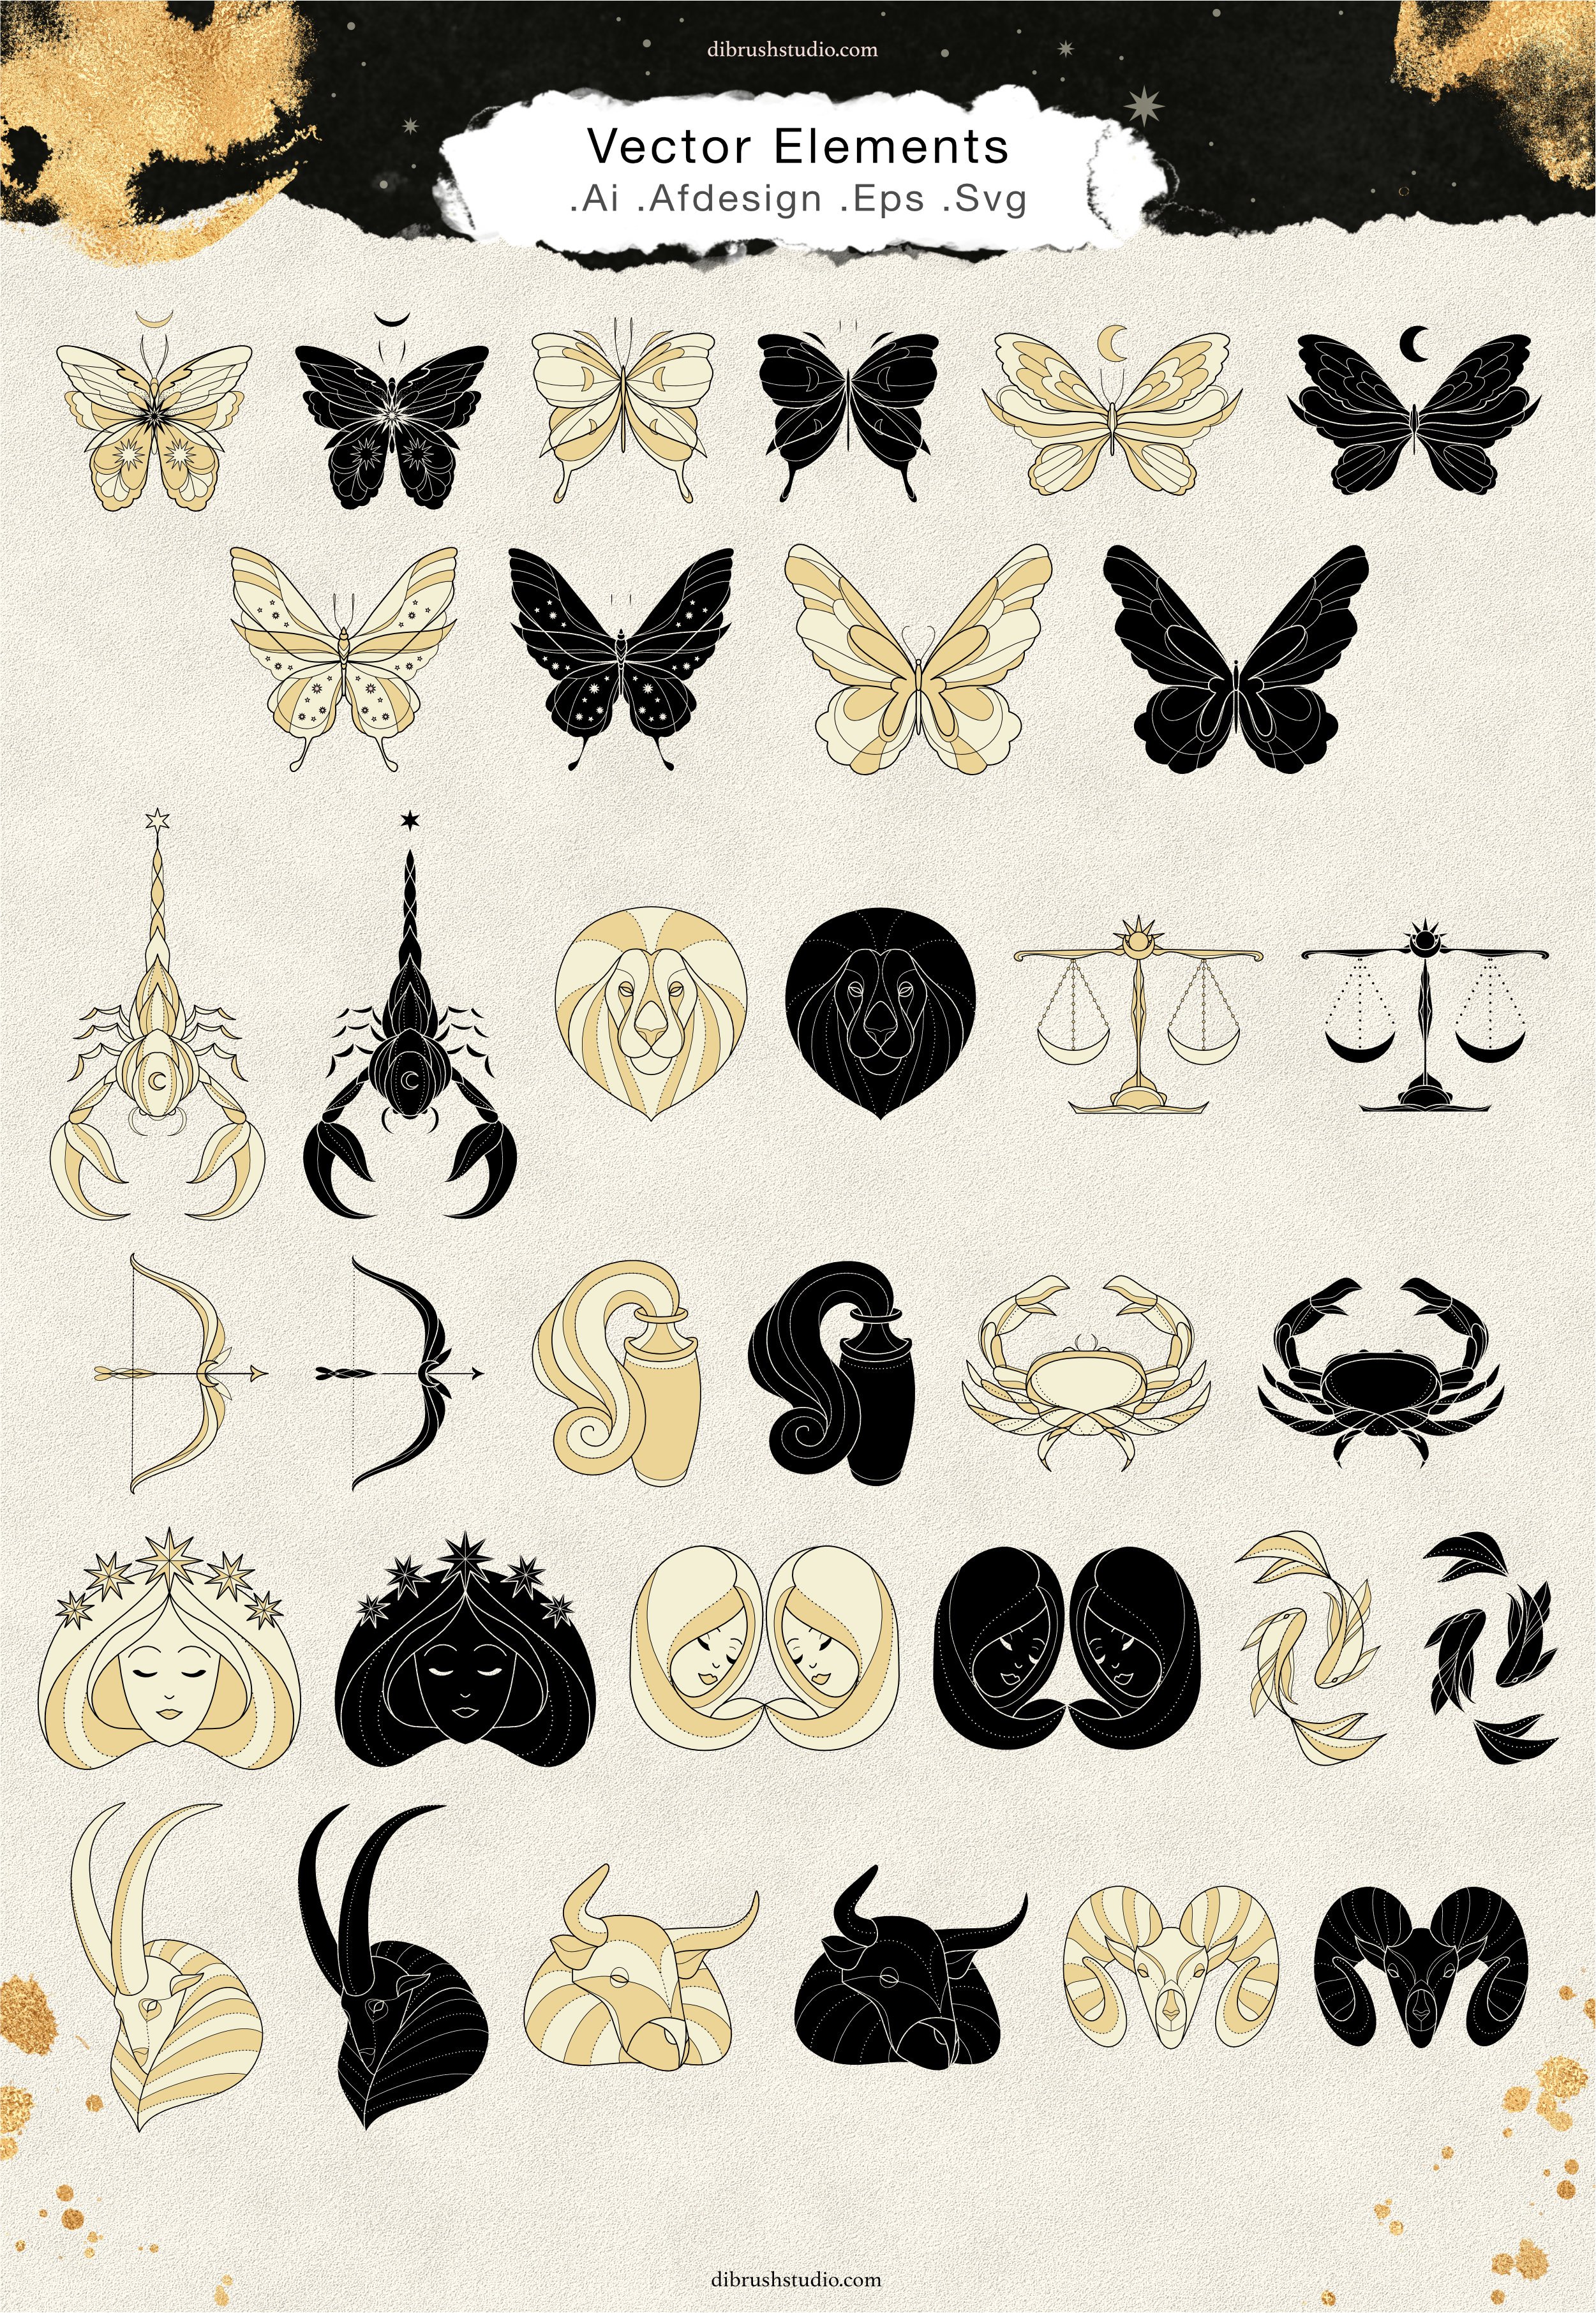 Nightfall - ClipArt & Vector Pack preview image.